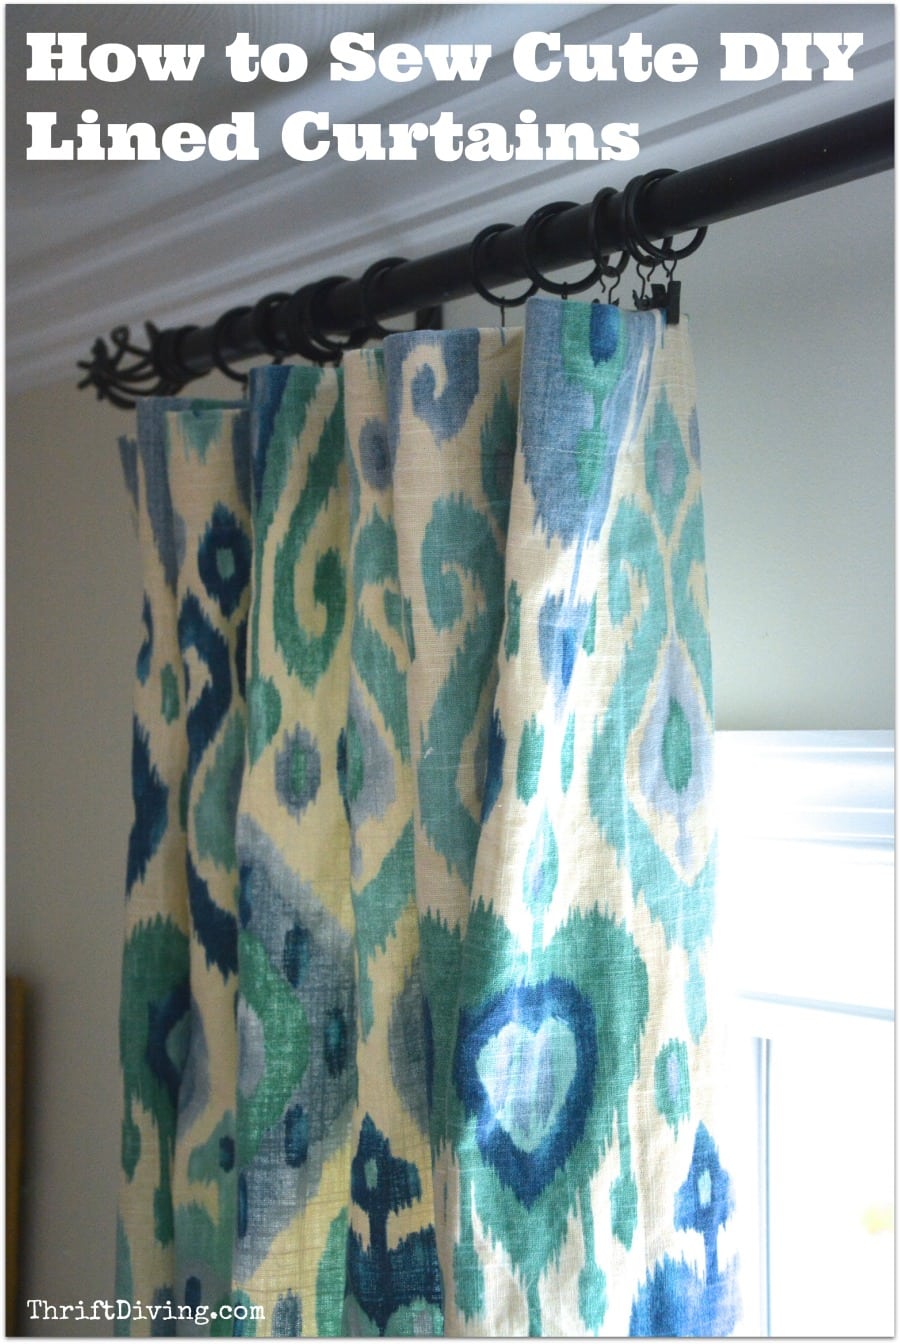 How to Sew Cute DIY Lined Curtains - Thrift Diving